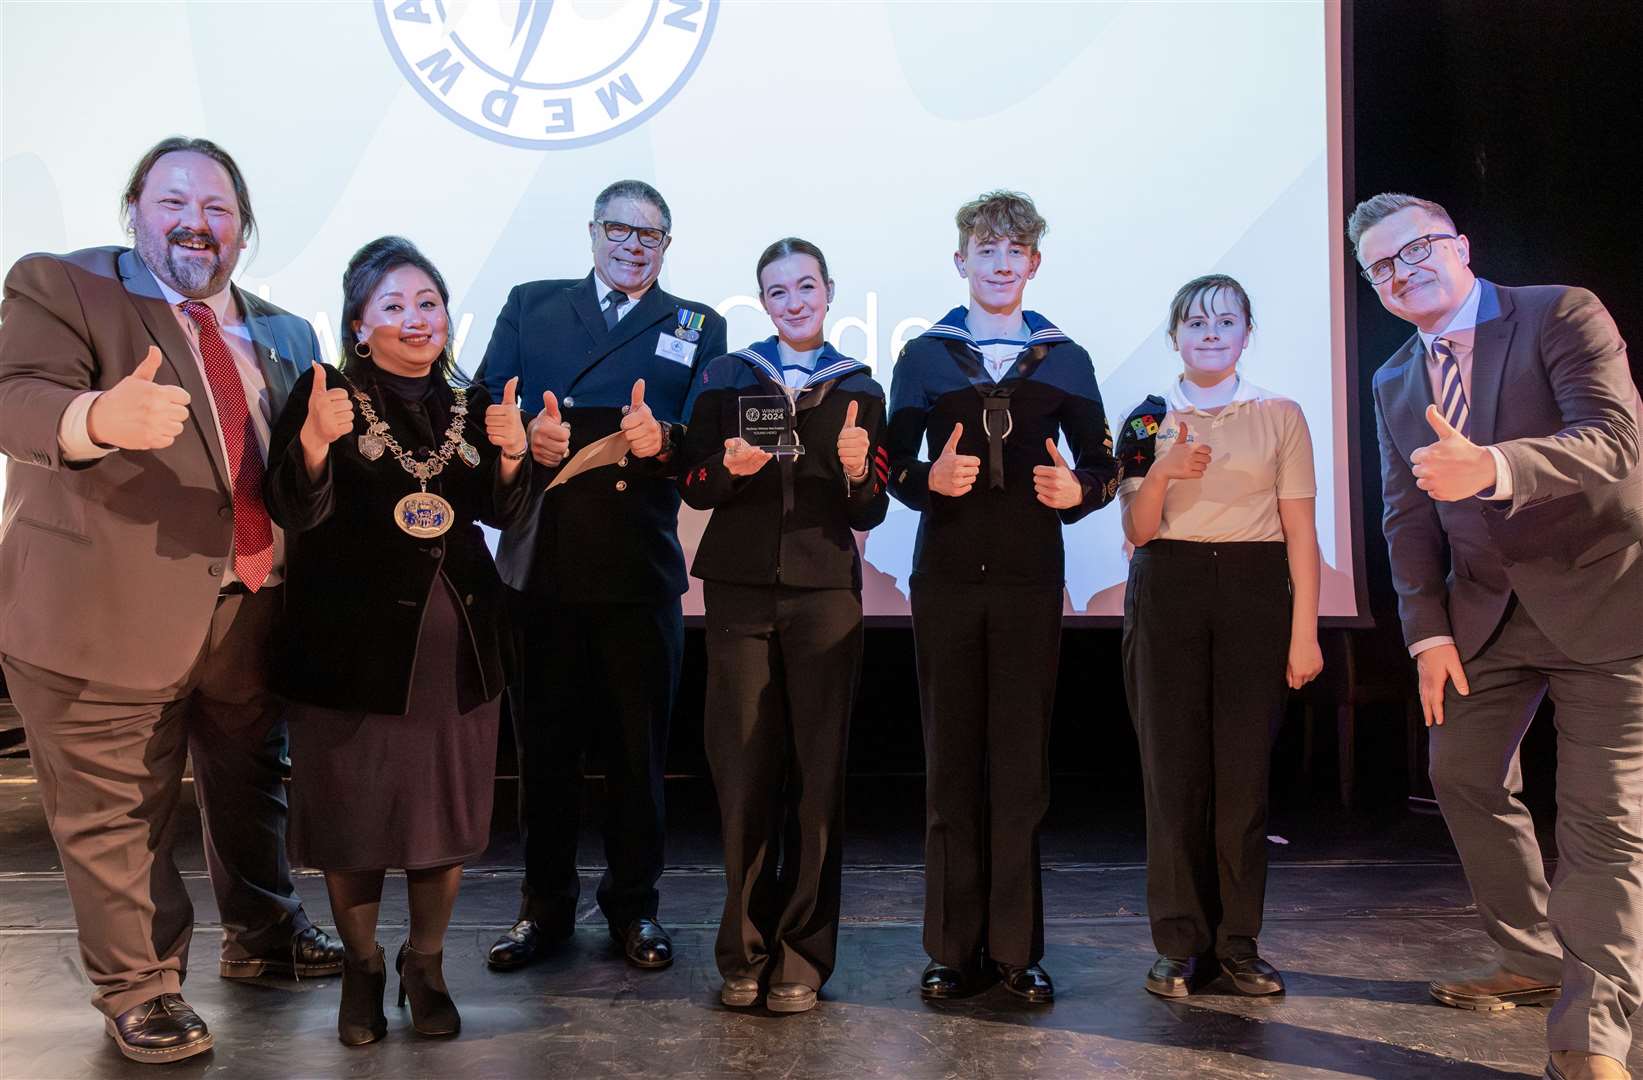 Medway Sea Cadets, winners of the Young Heroes Award, with Cllr Vince Maple, Mayor Nina Gurung and Phil Gallagher, children's television presenter. Picture: Pillory Barn